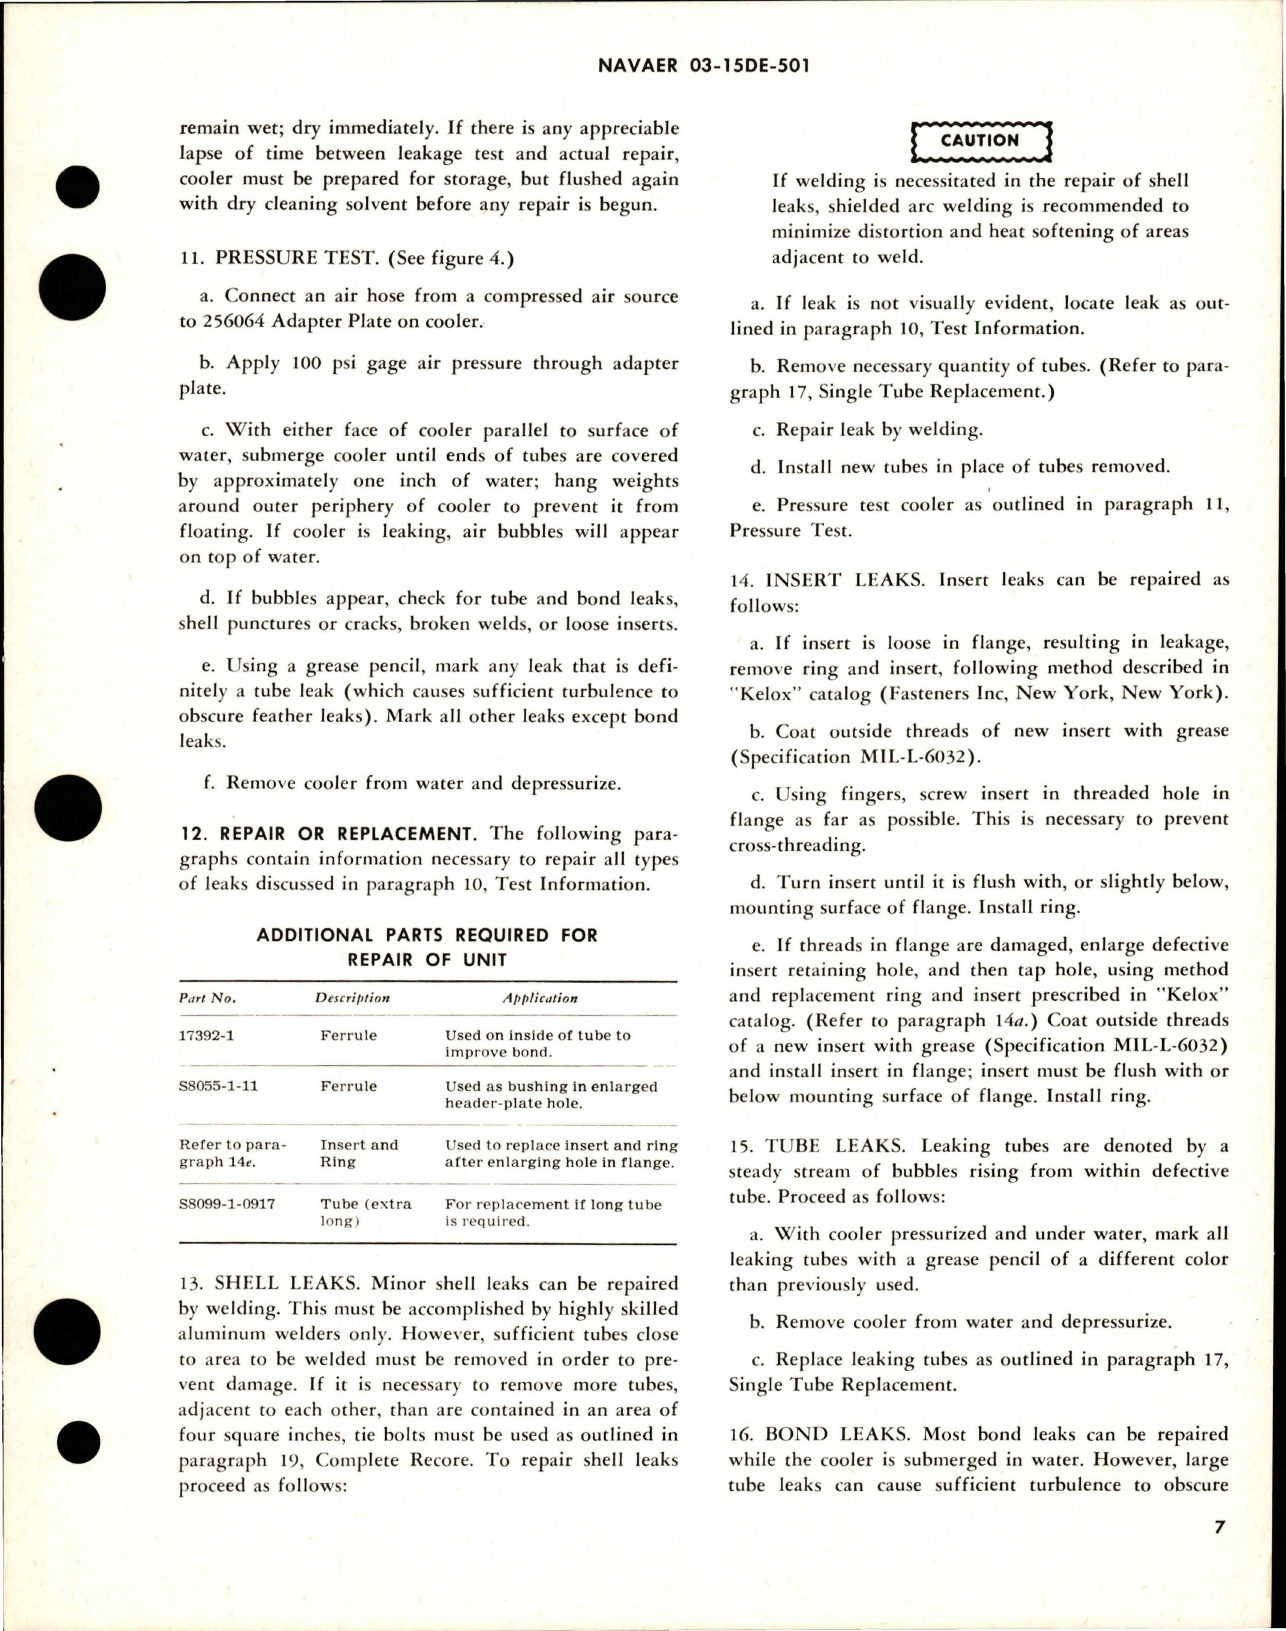 Sample page 7 from AirCorps Library document: Overhaul Instructions with Parts Breakdown for Oil Cooler - AIR4124-14 